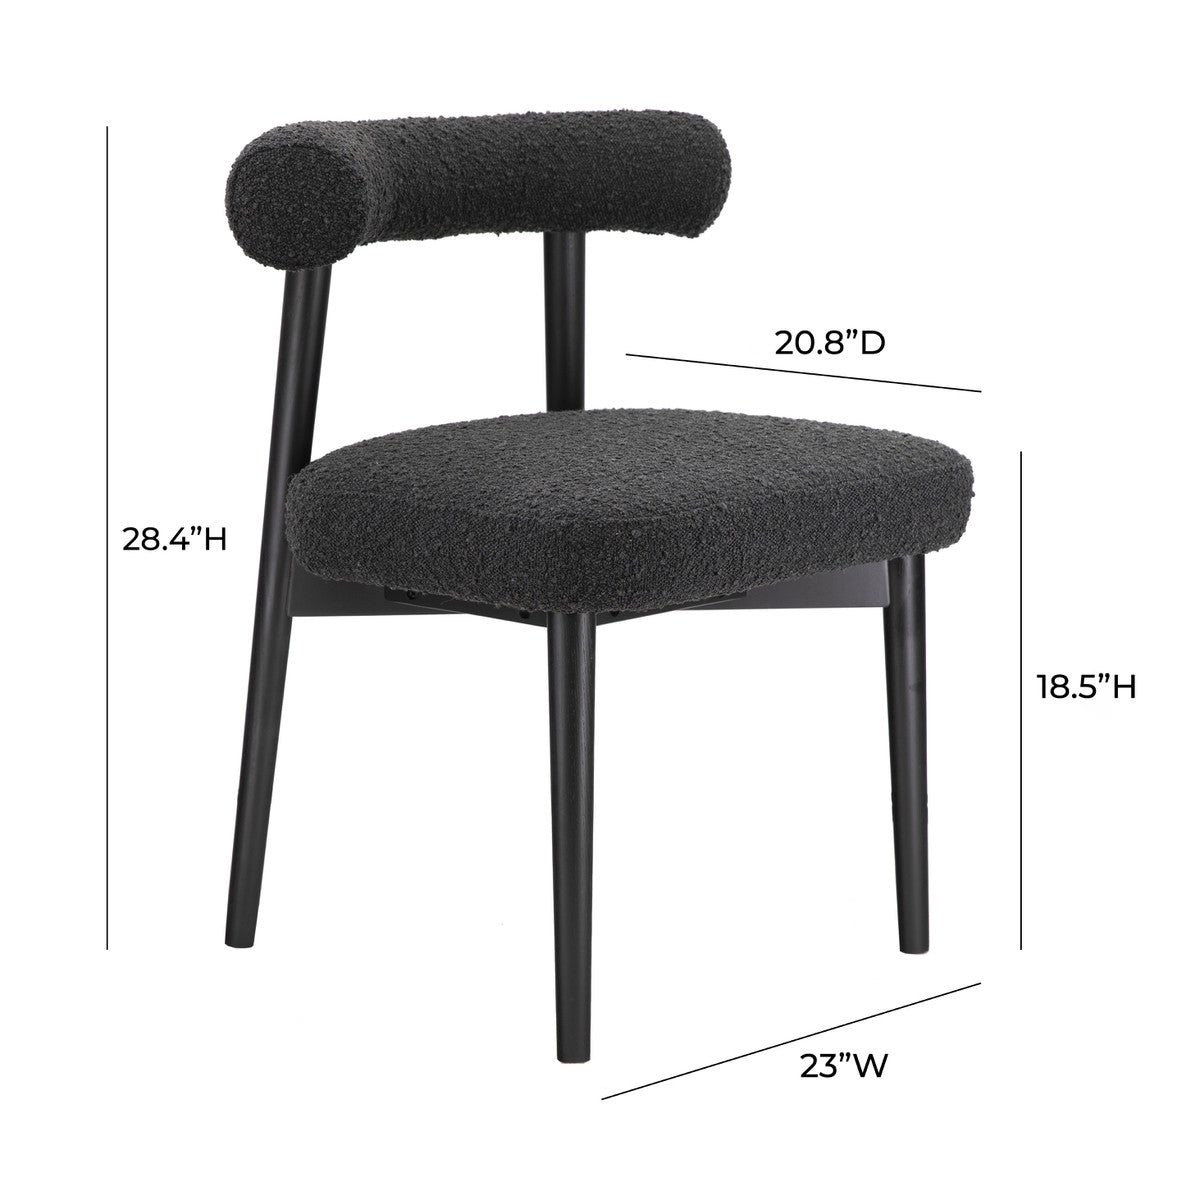 Mirage Black Boucle Side Dining Chair - Luxury Living Collection